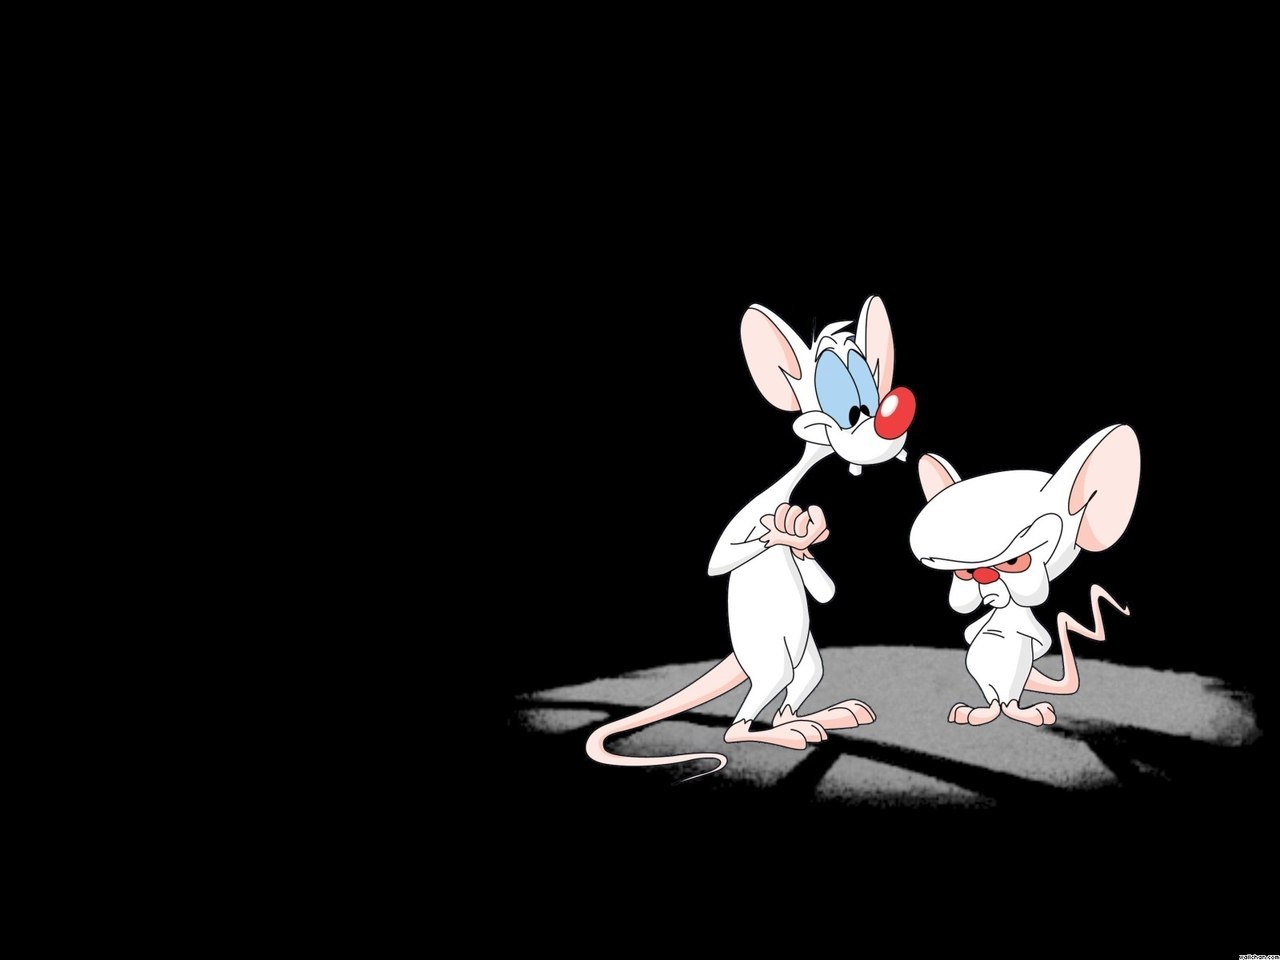 15384 download wallpaper cartoon, mice, black screensavers and pictures for free